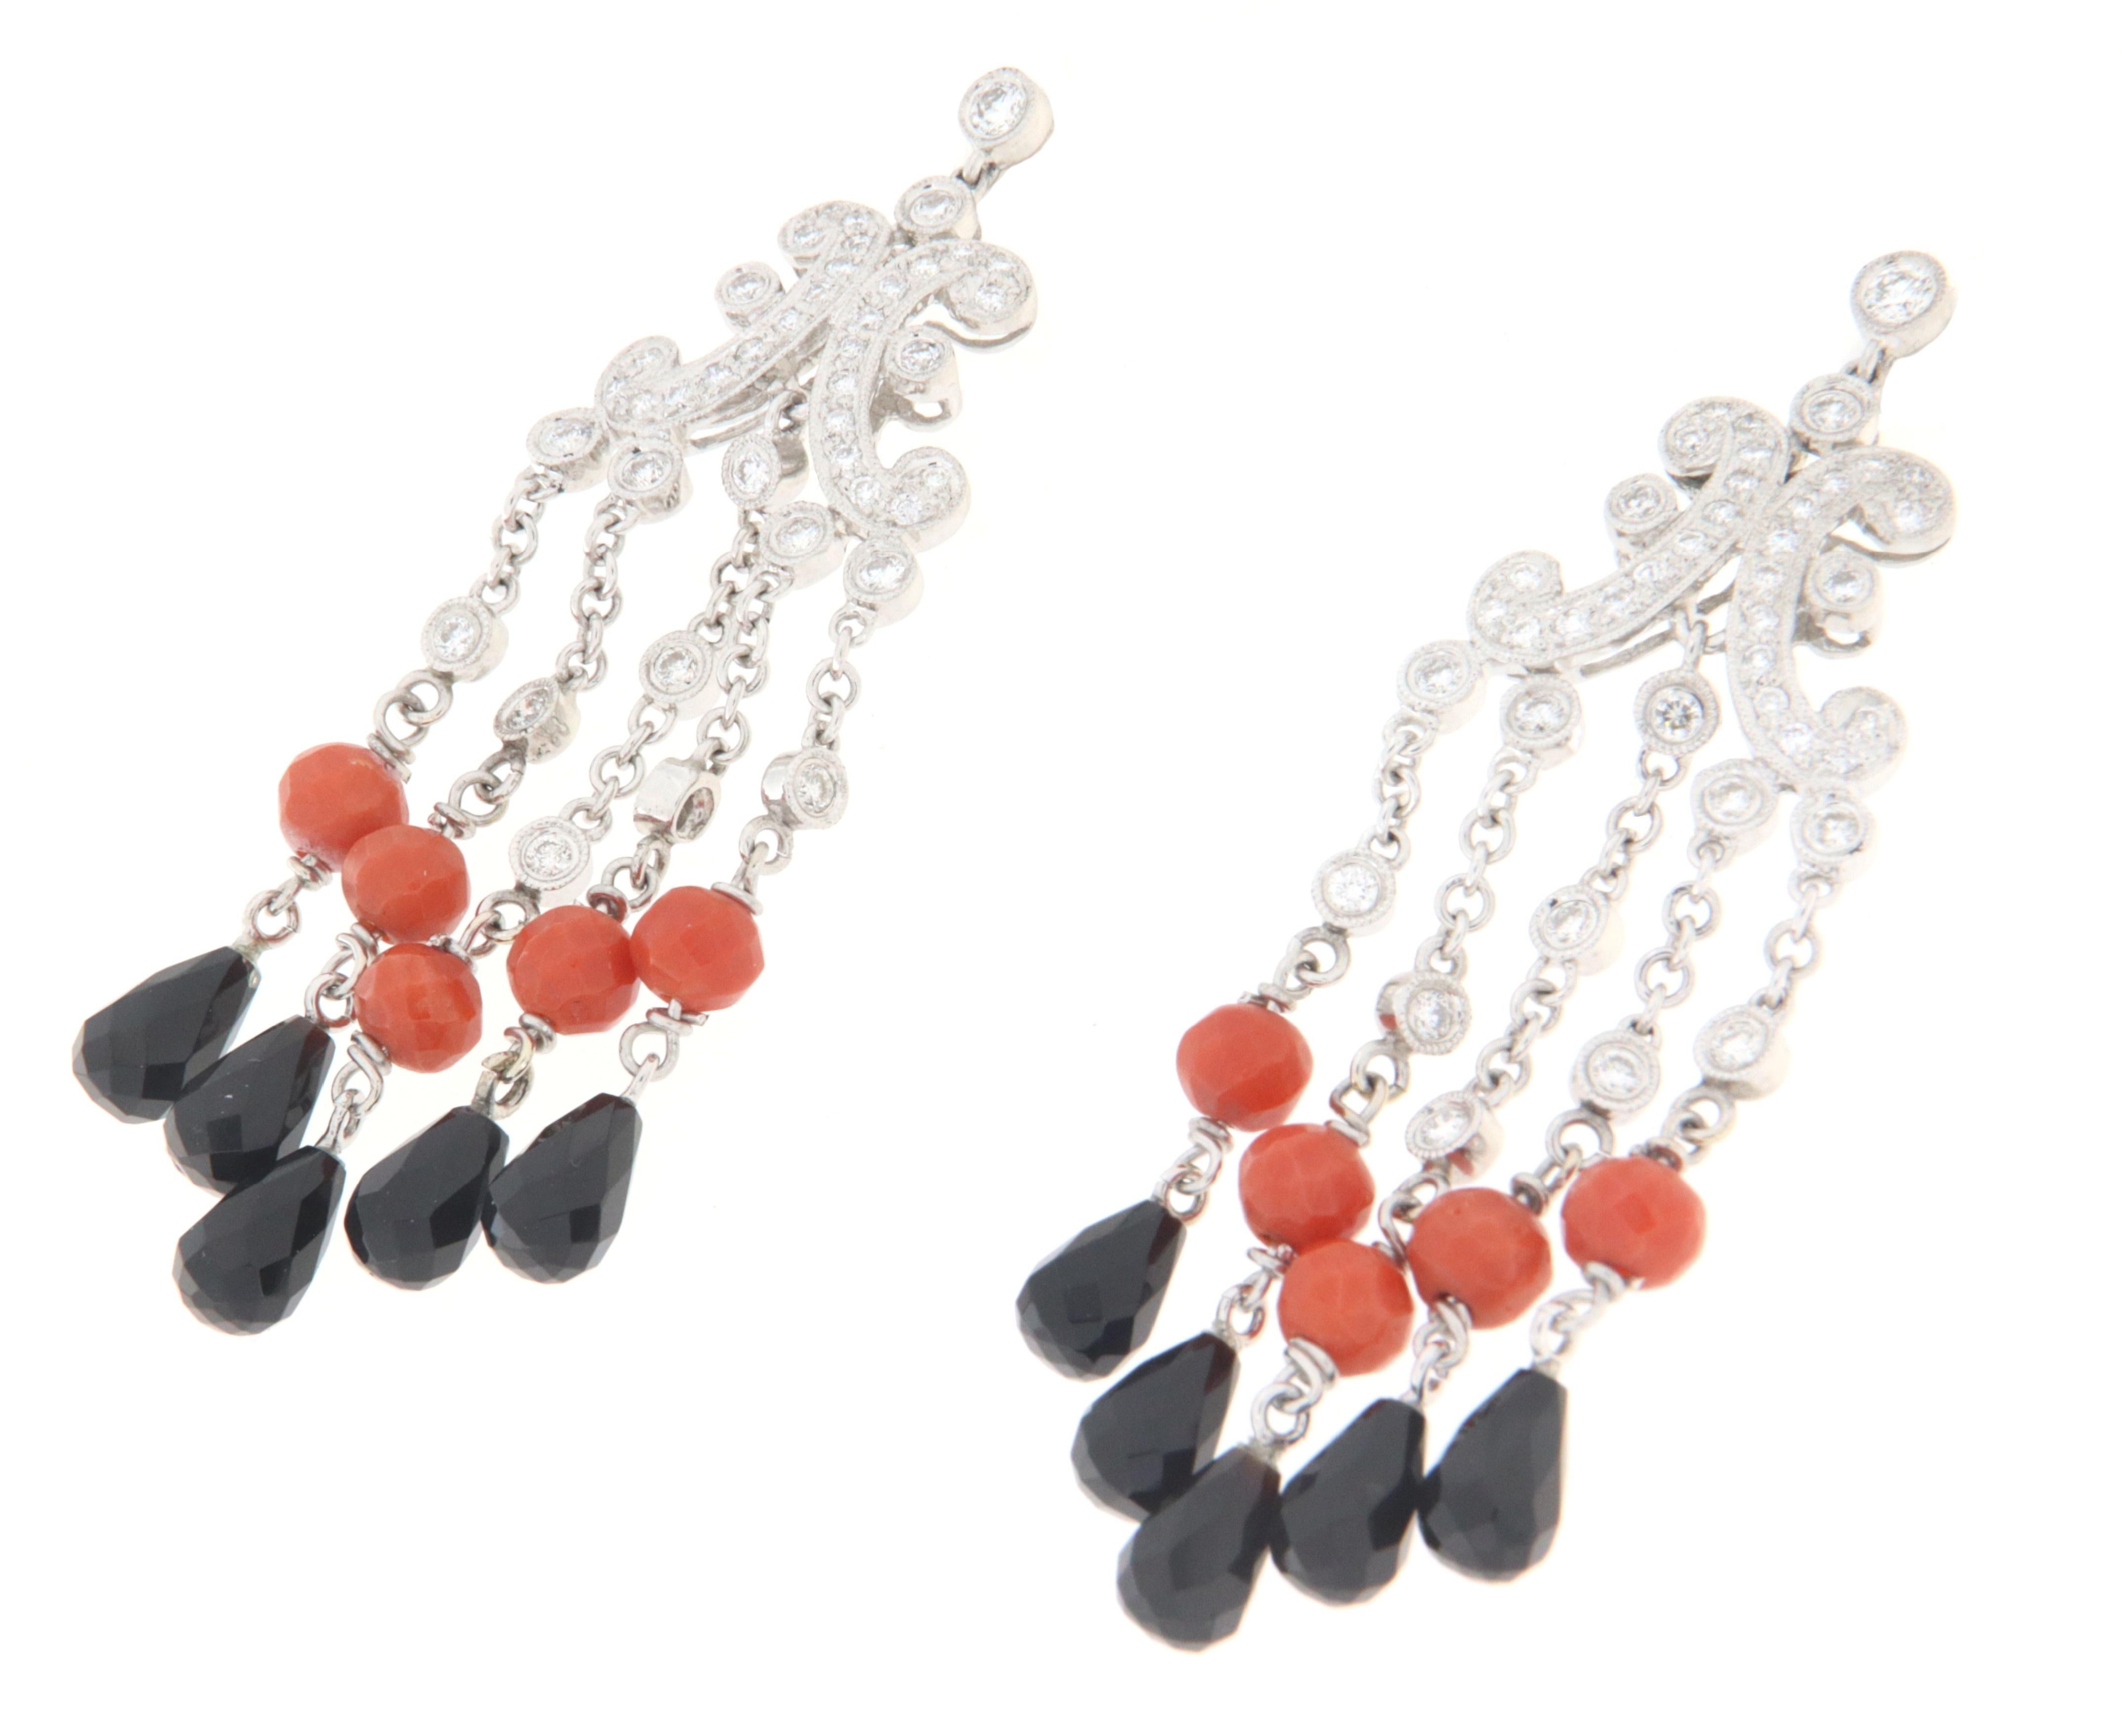 Magnificent earring created entirely by hand by skilled goldsmiths of Naples in 18k white gold mounted with coral,drop onyx and diamonds.
An elegant earring that can also be displayed for less important occasions, a jewel that any woman would like